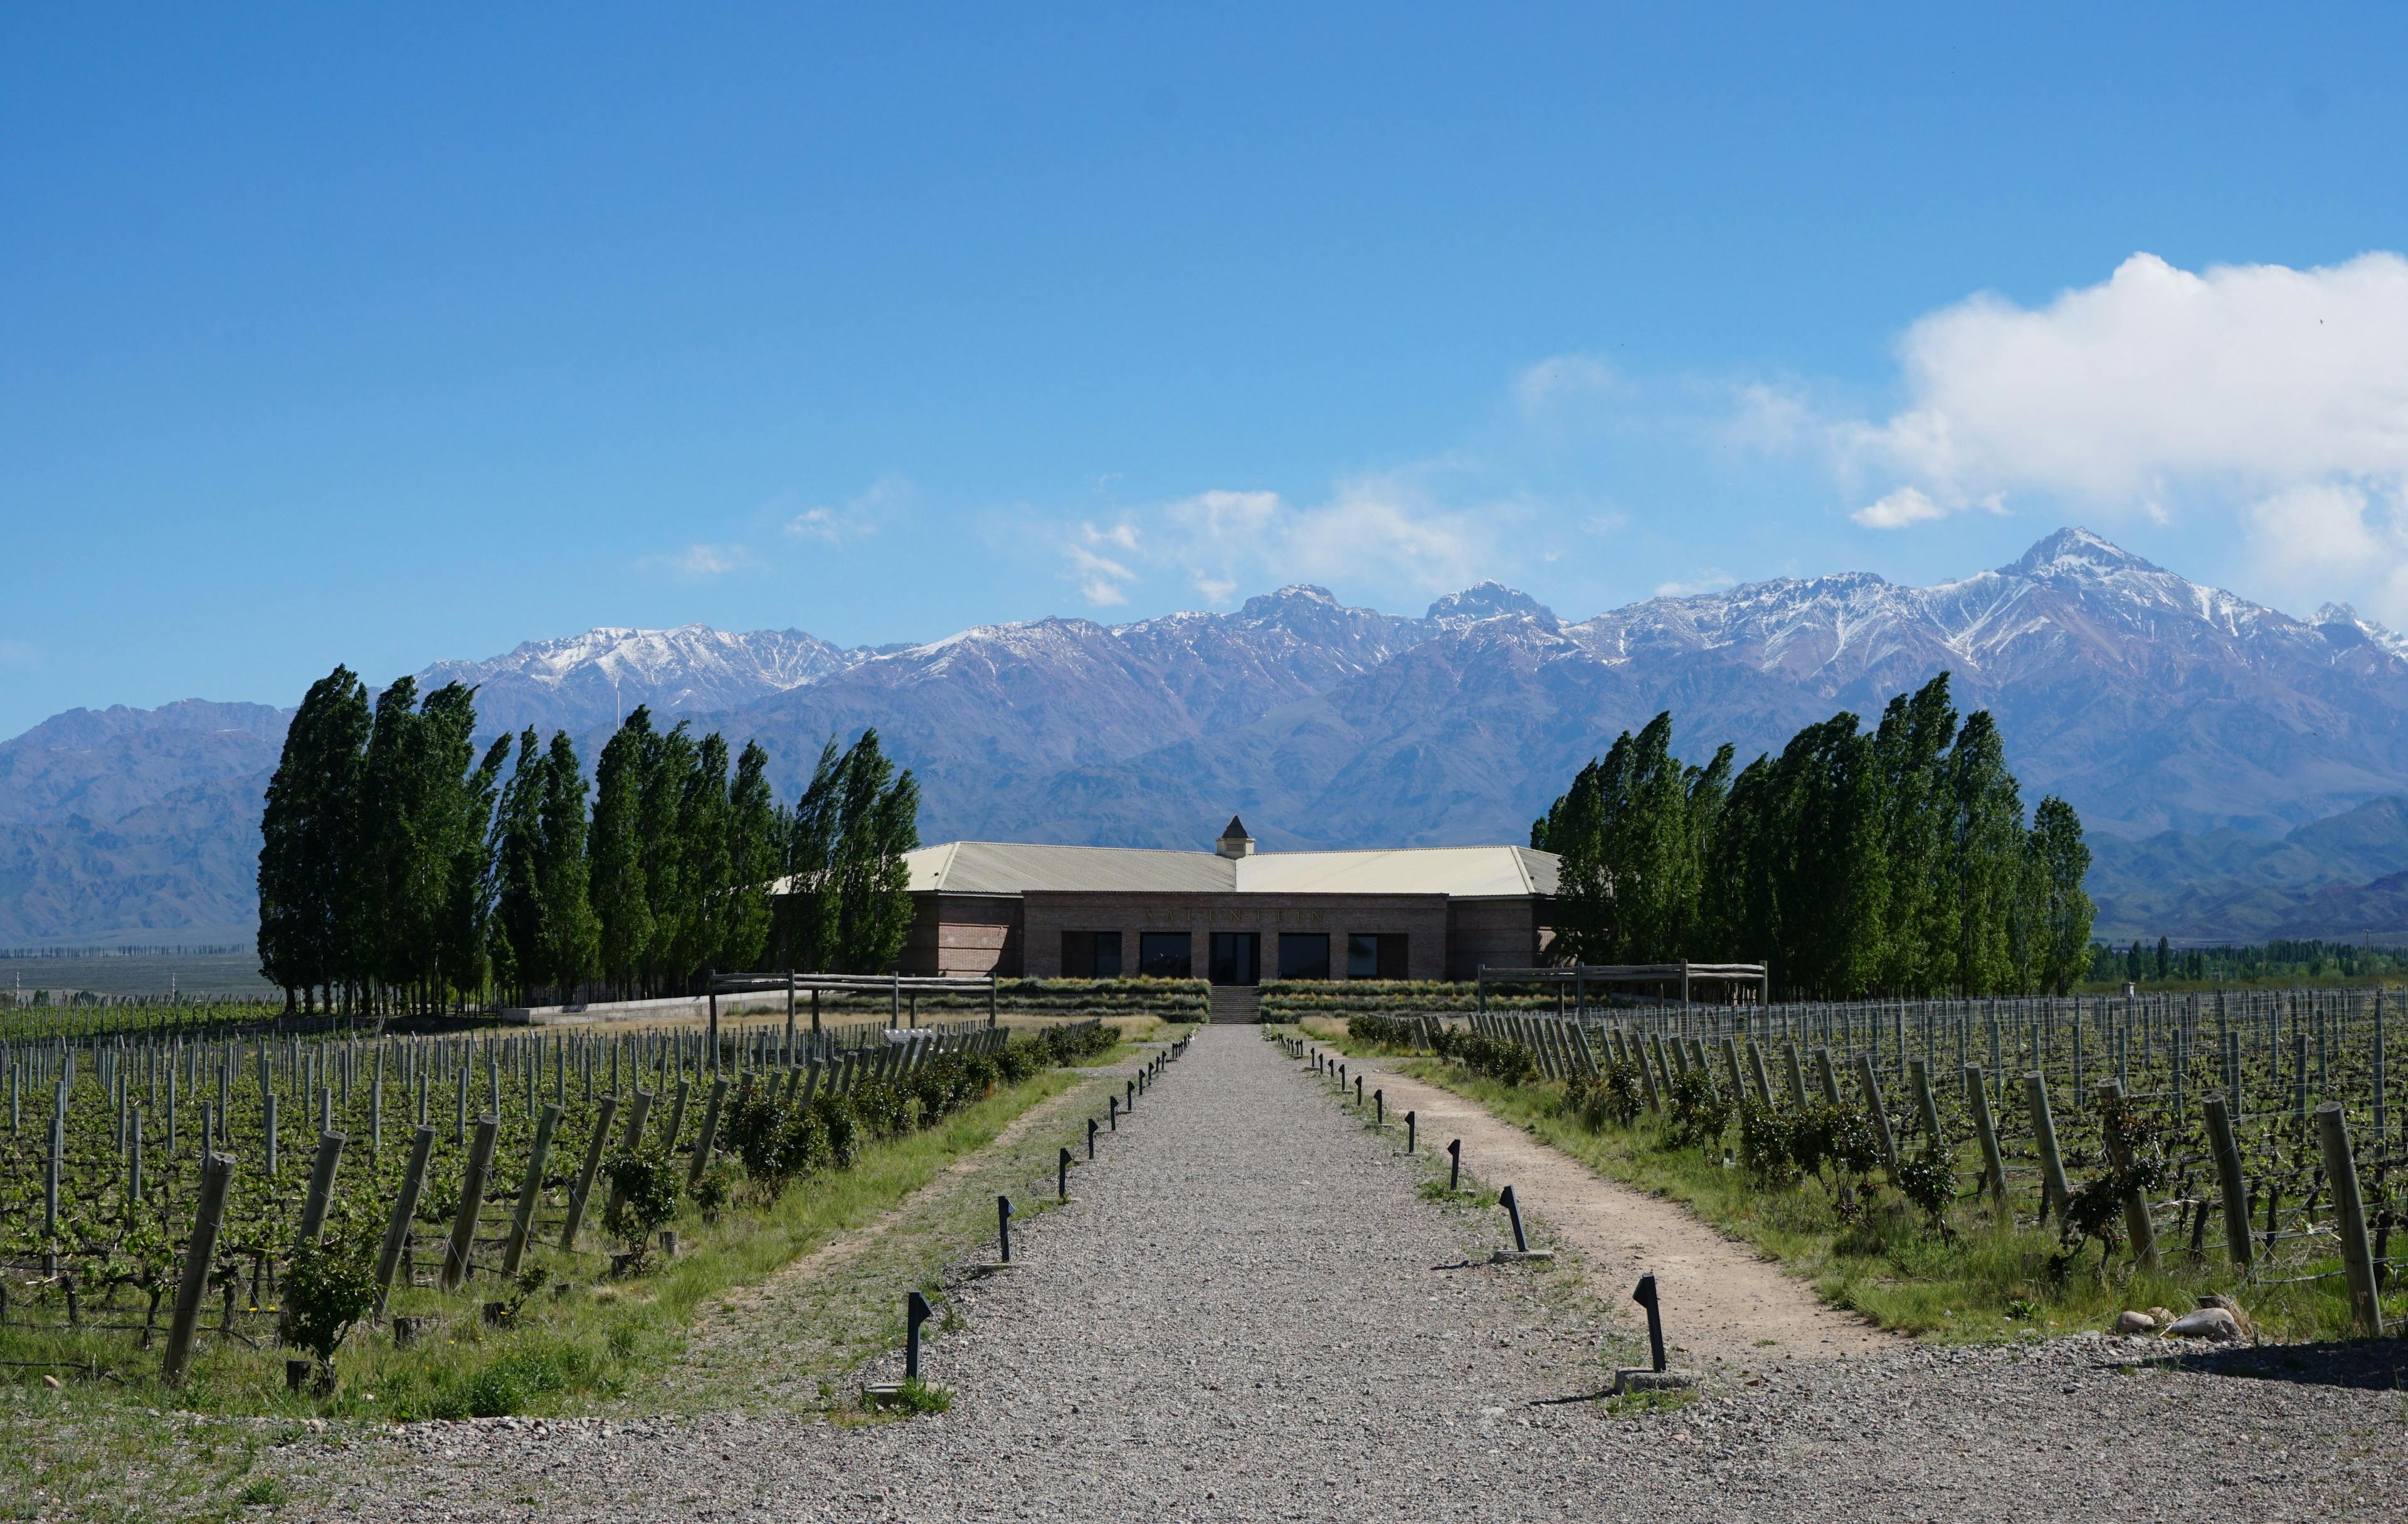 Entrance to winery in Mendoza Argentina.